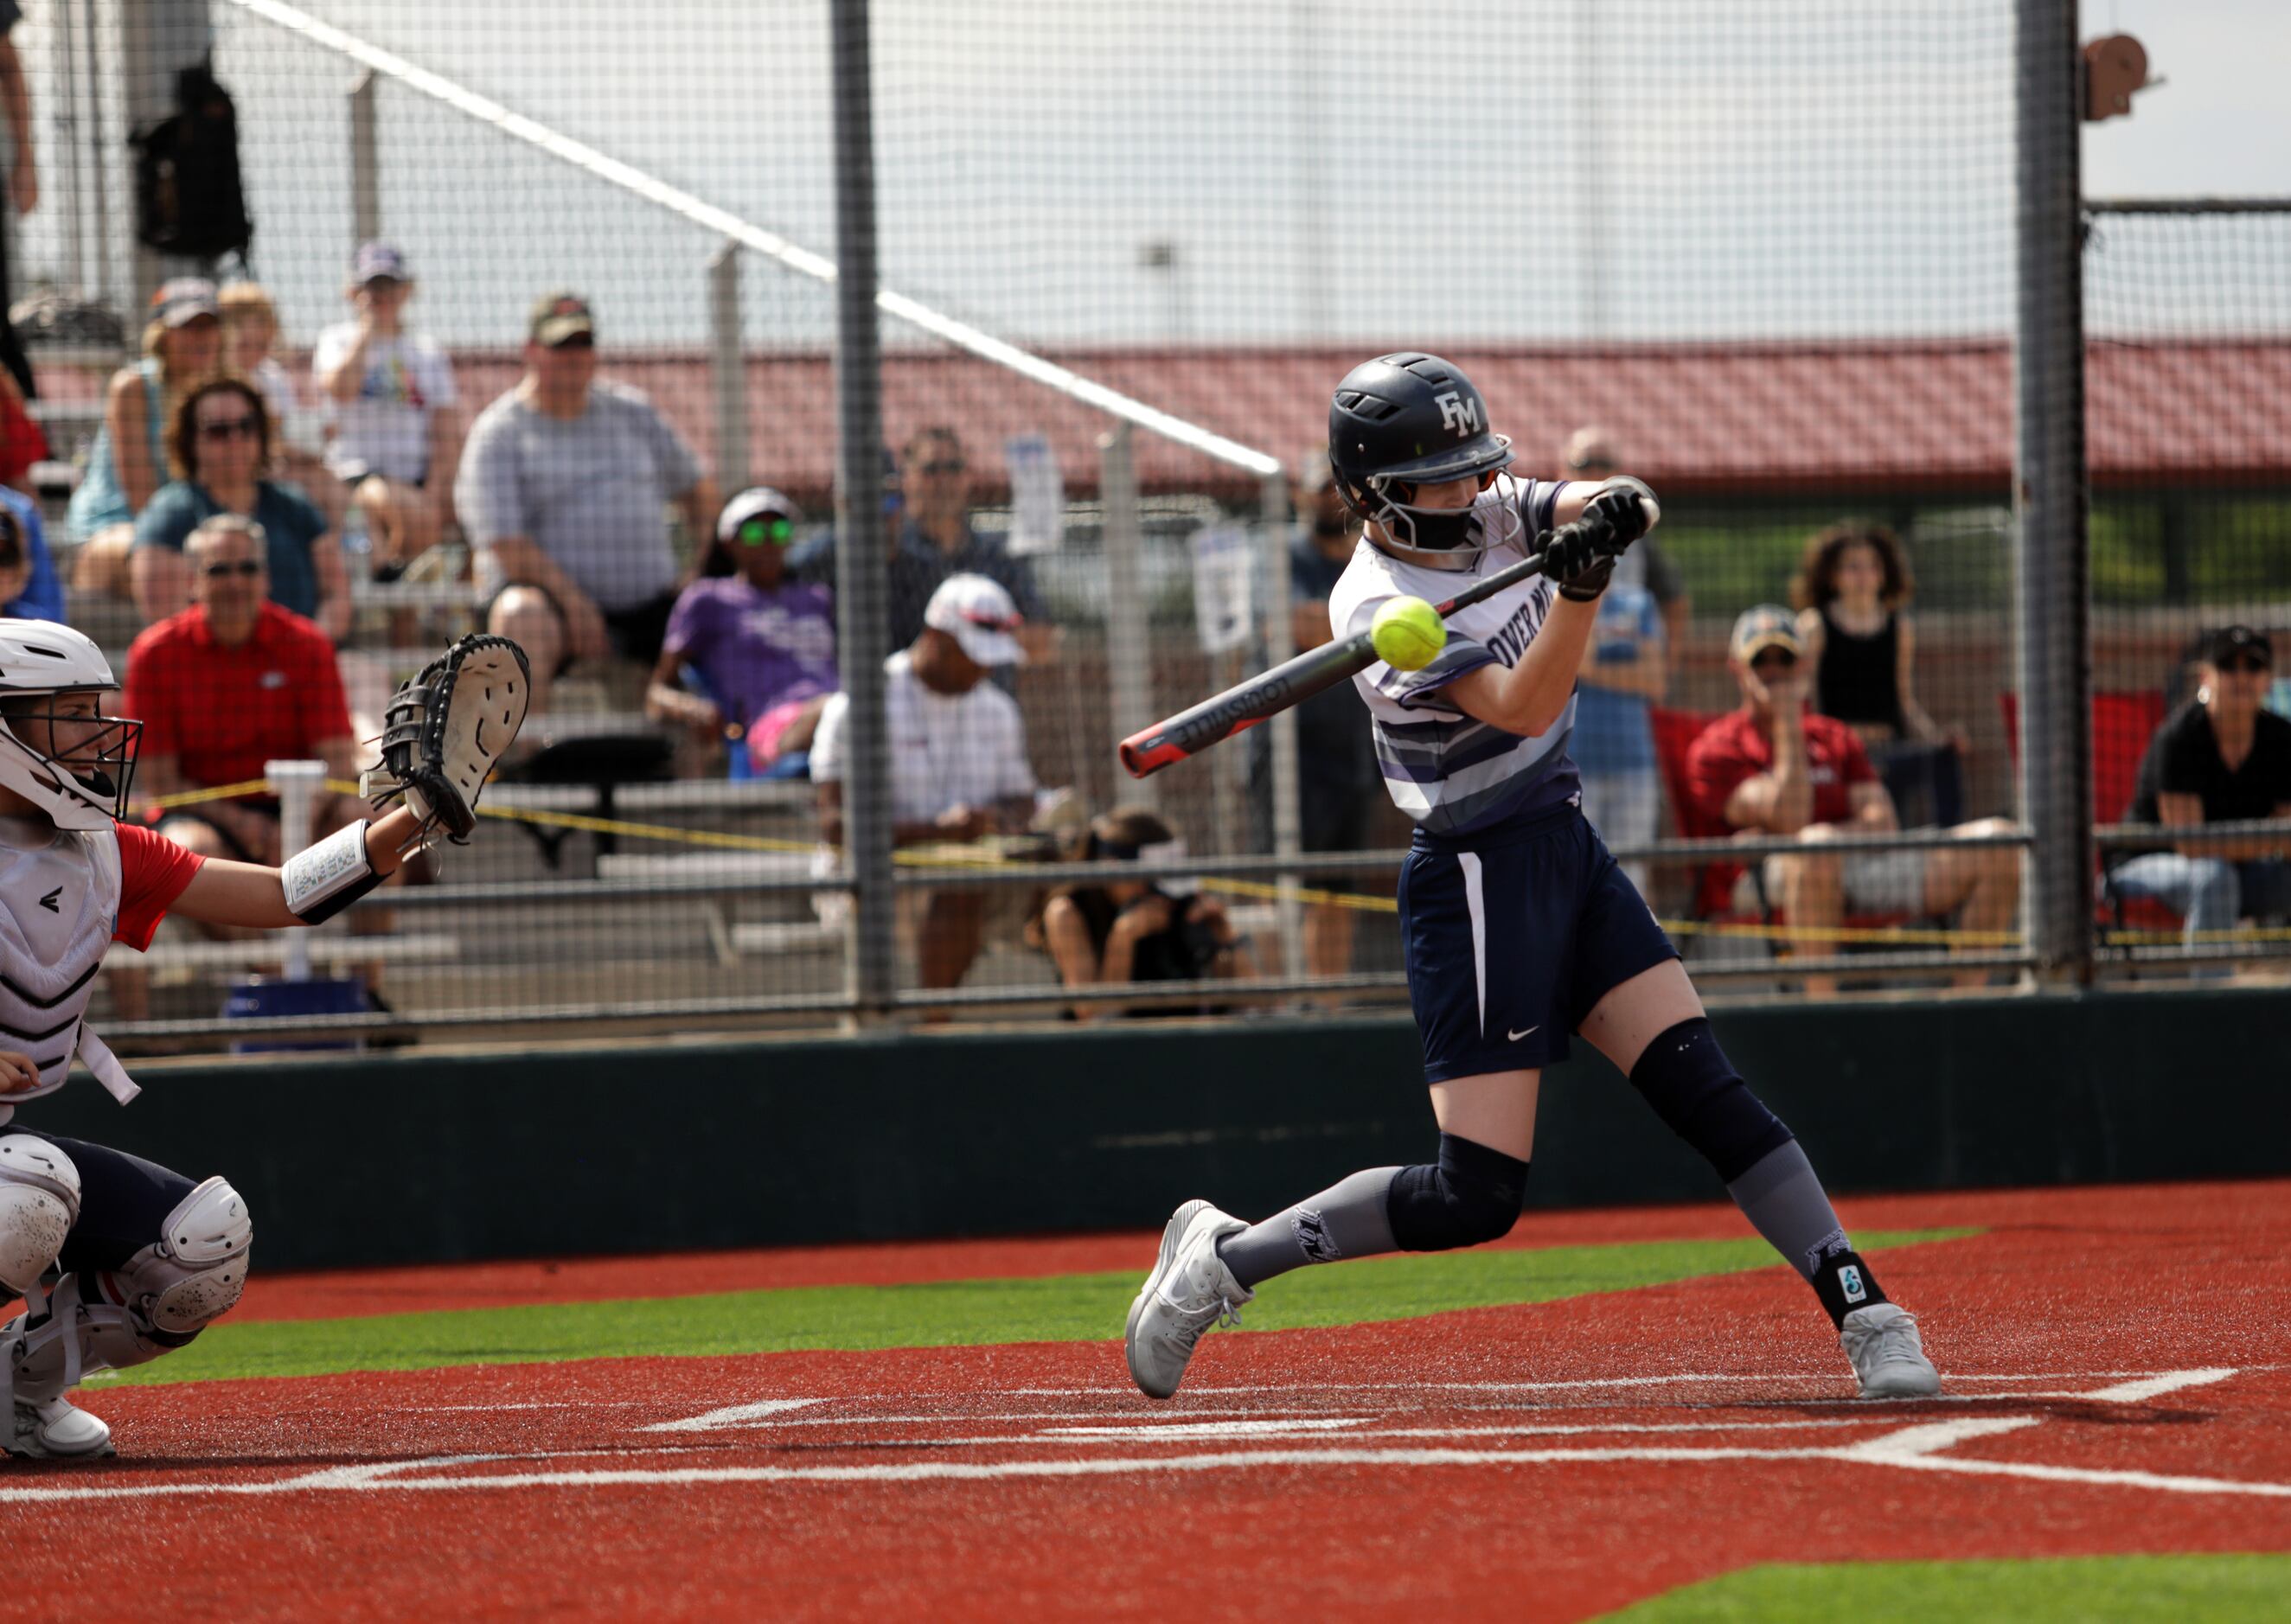 Flower Mound High School player #8, Carsyn Lee, hits the ball during a softball game against...